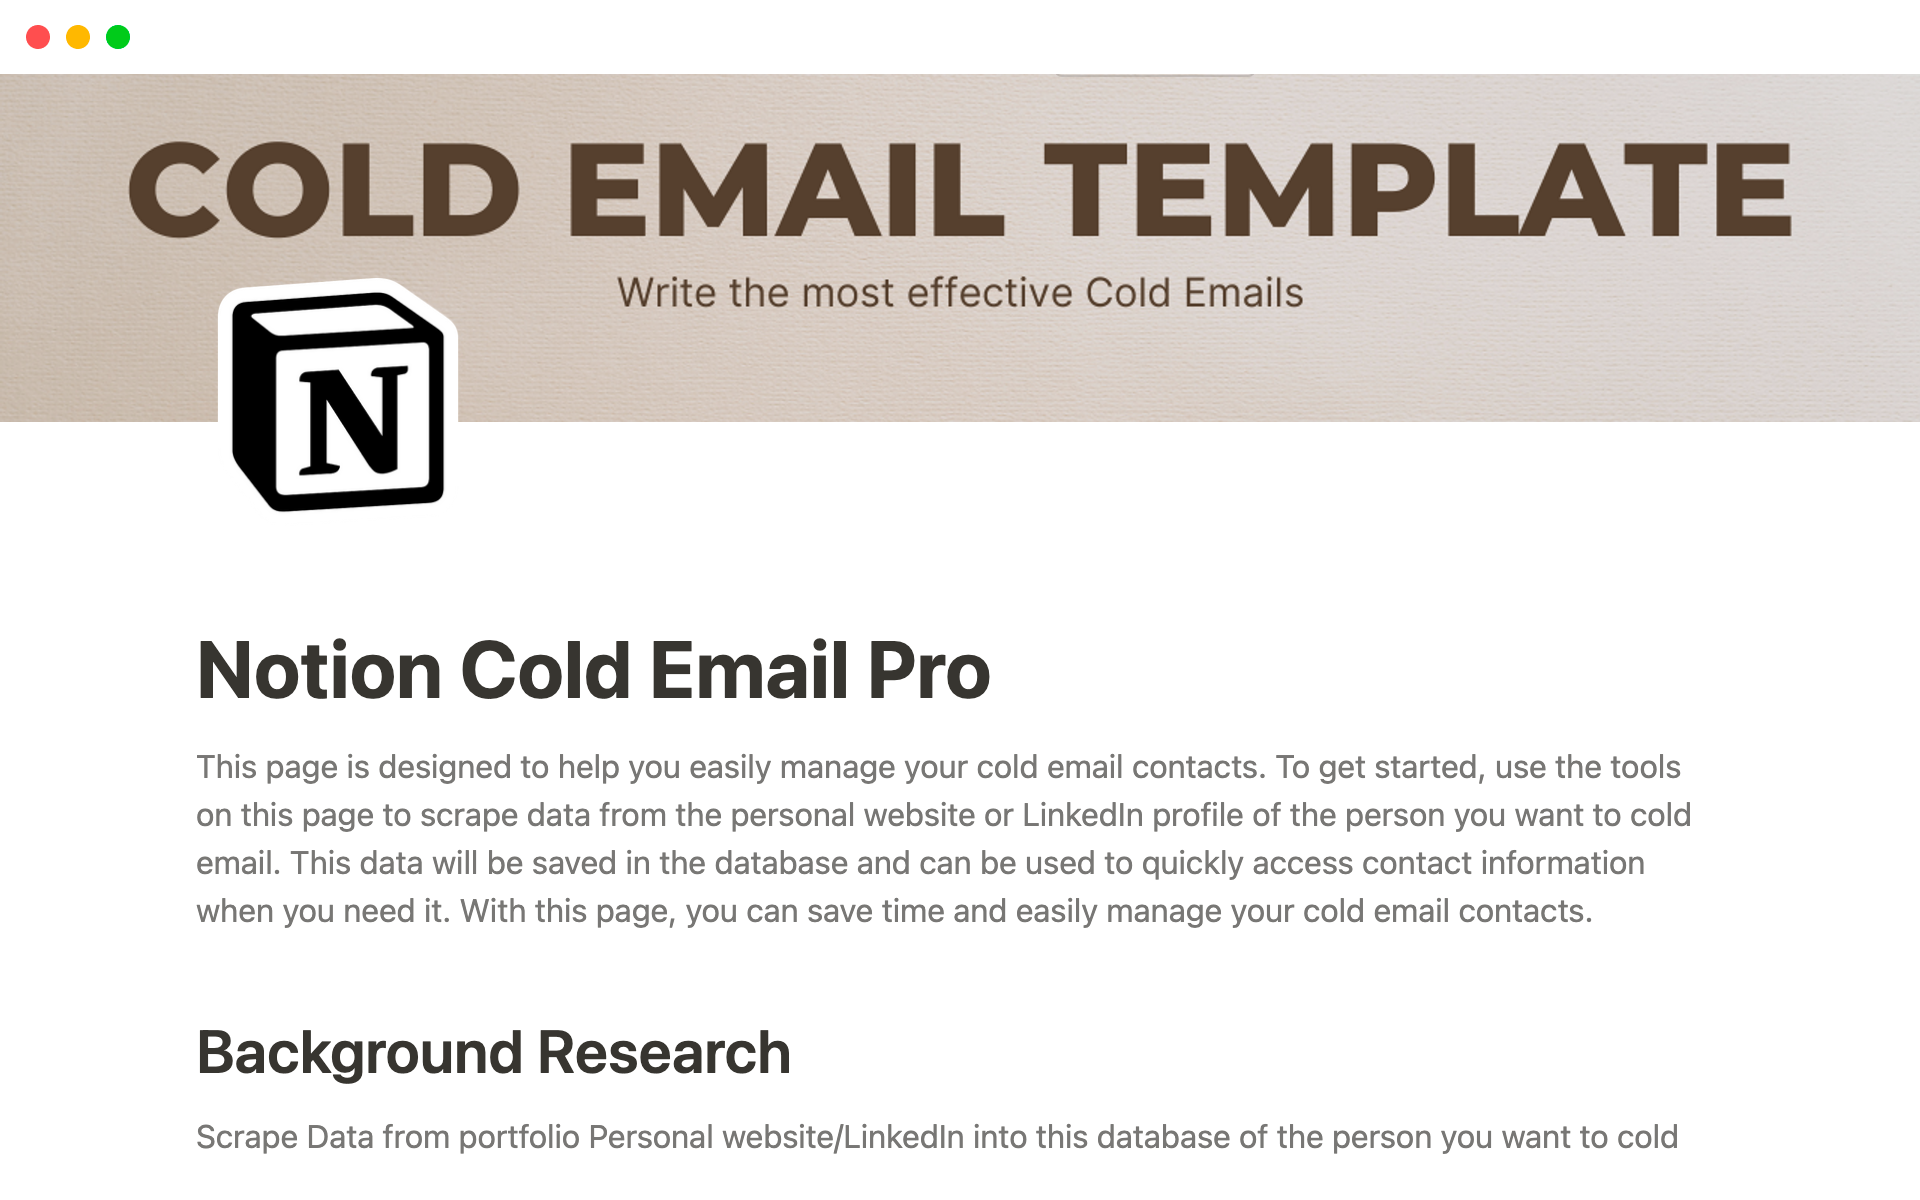 Notion Cold Email Template, a comprehensive tool designed to help you land your dream internship/job.